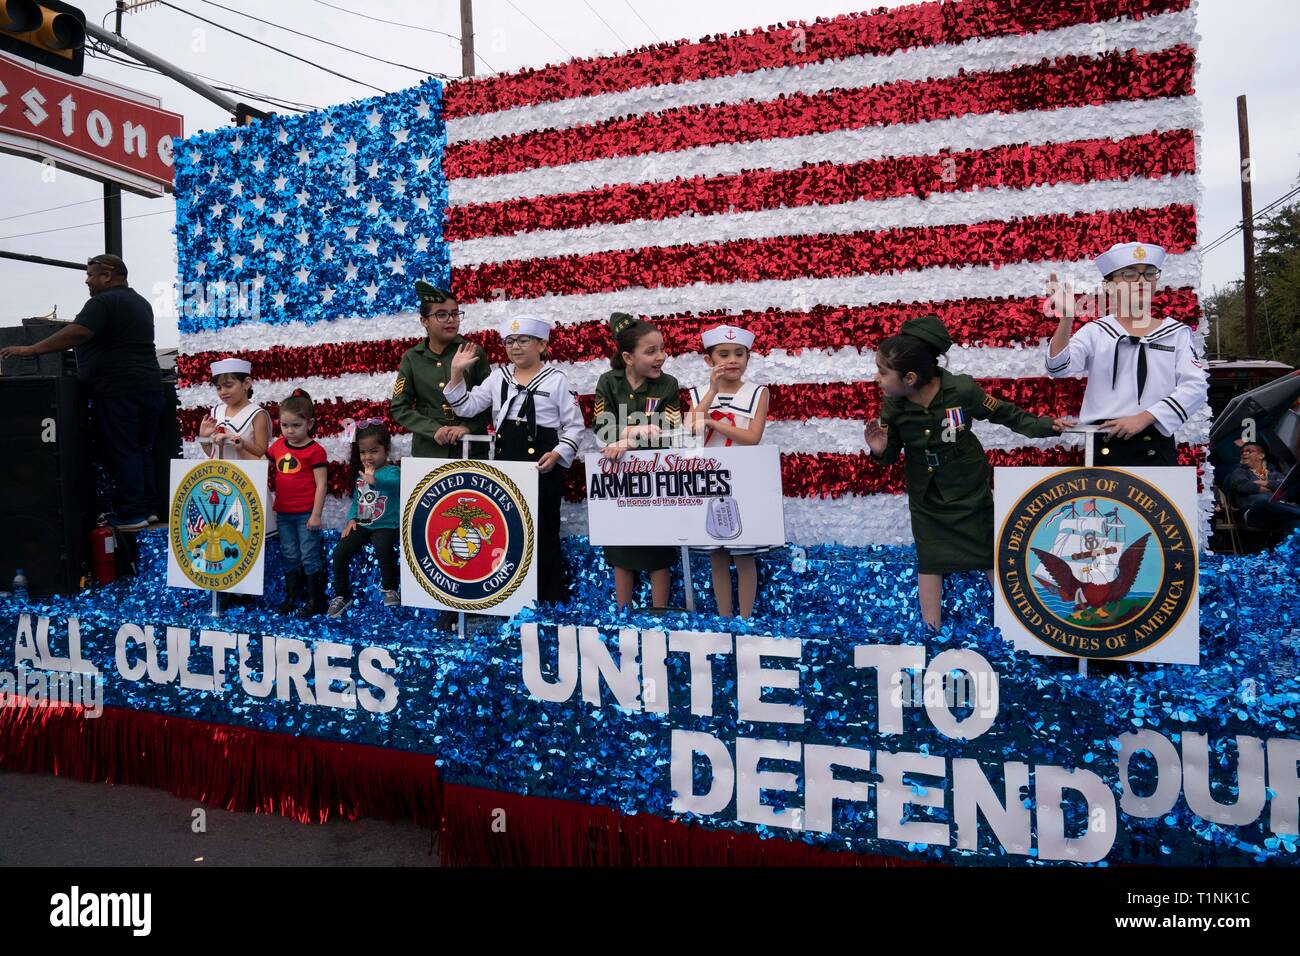 Children dressed in military uniforms ride on float recognizing branches of  the U.S. military during parade in downtown Laredo, Texas Stock Photo -  Alamy